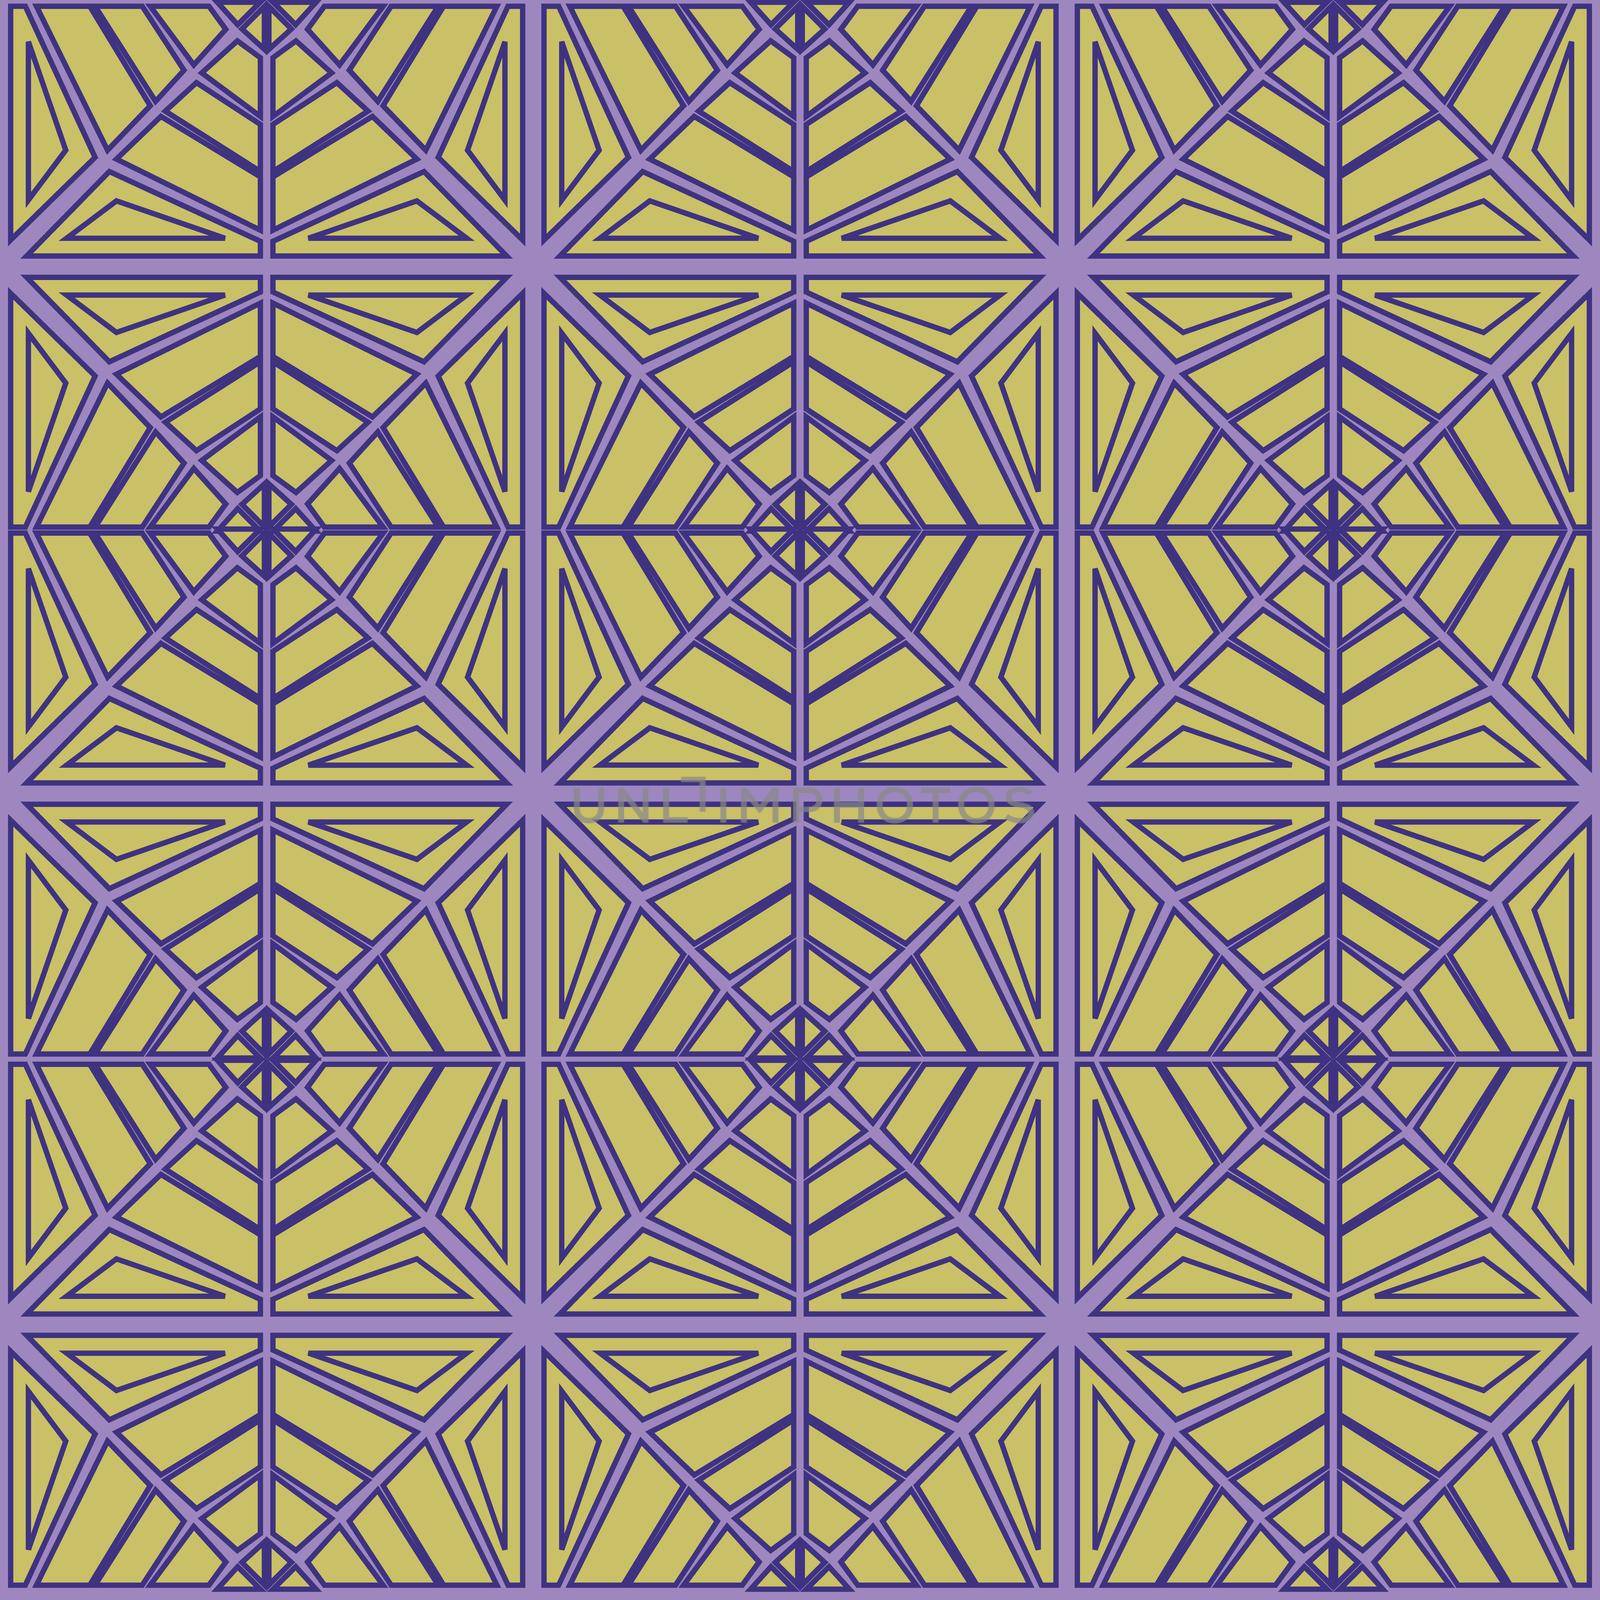 Geometric seamless pattern web . Can be used for backgrounds. illustration.